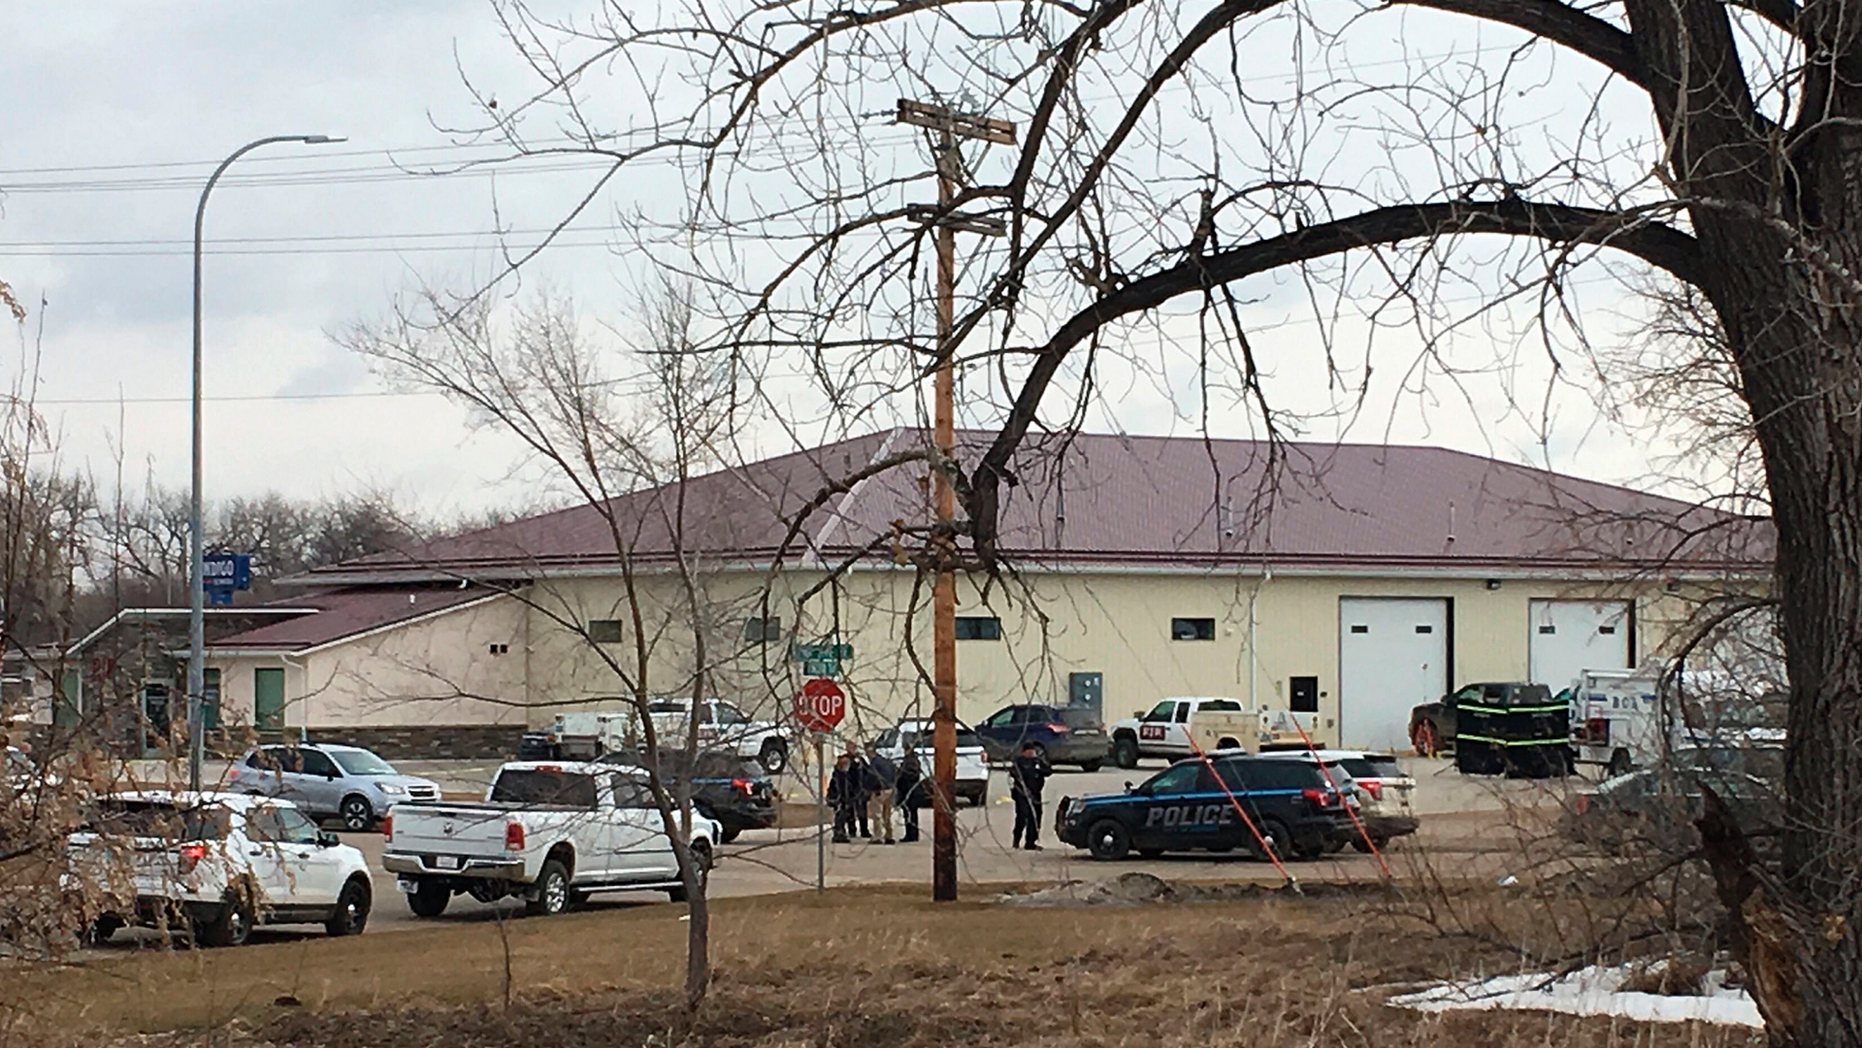 Police vehicles are seen at the back of RJR Maintenance and Management, a property management company, on Monday, April 1, 2019, Mandan, ND. Authorities say the police responded to a medical appeal regarding the police. North Dakota activity. 